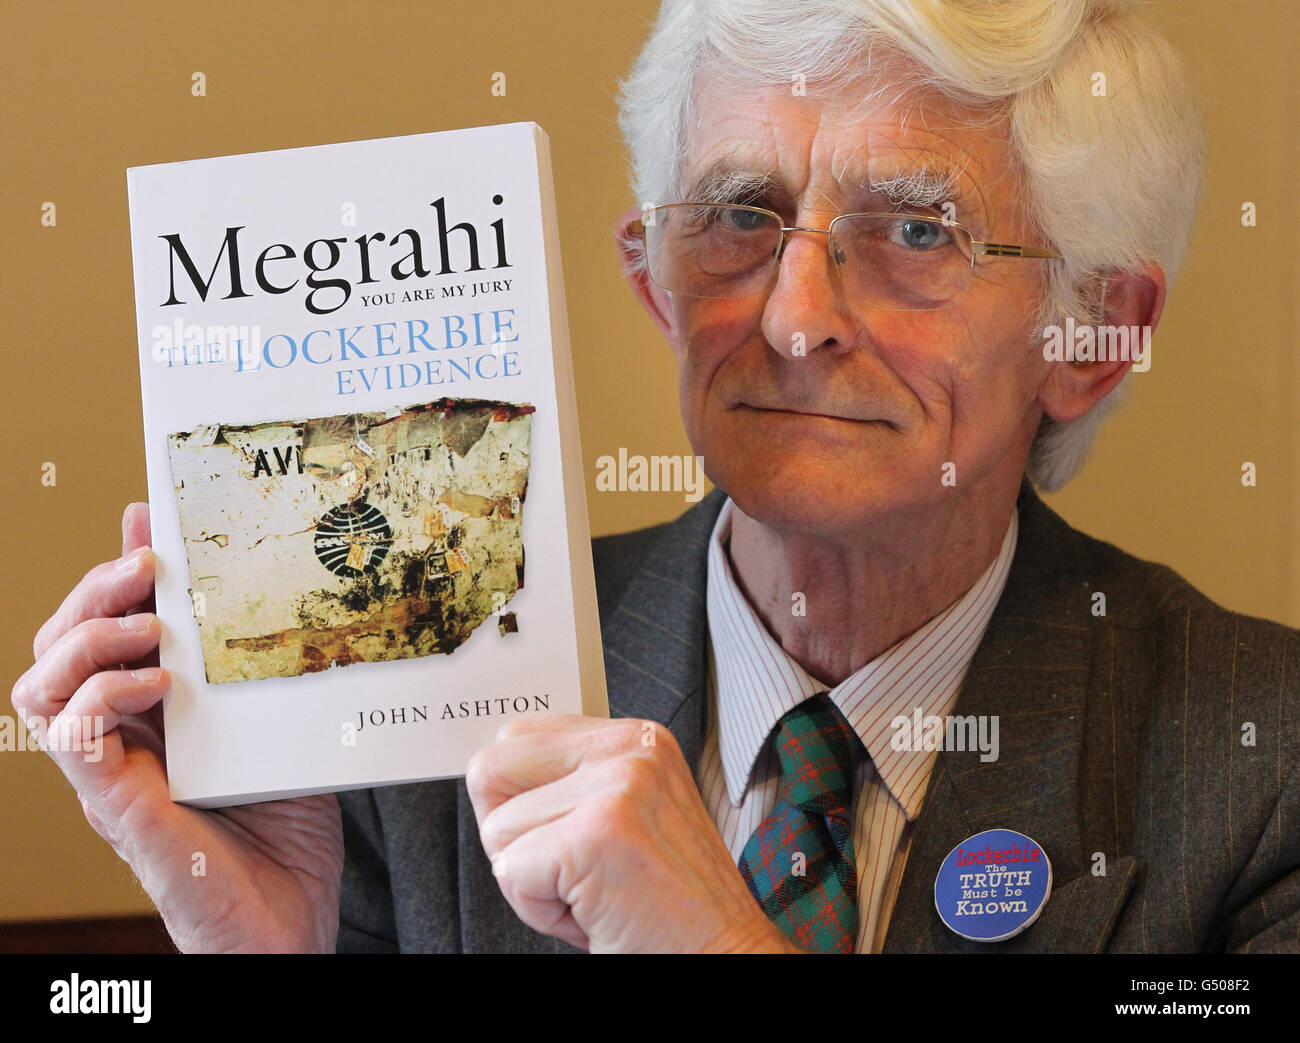 Dr Jim Swire holds the book 'Megrahi: You Are My Jury' during the book launch in Edinburgh. Stock Photo